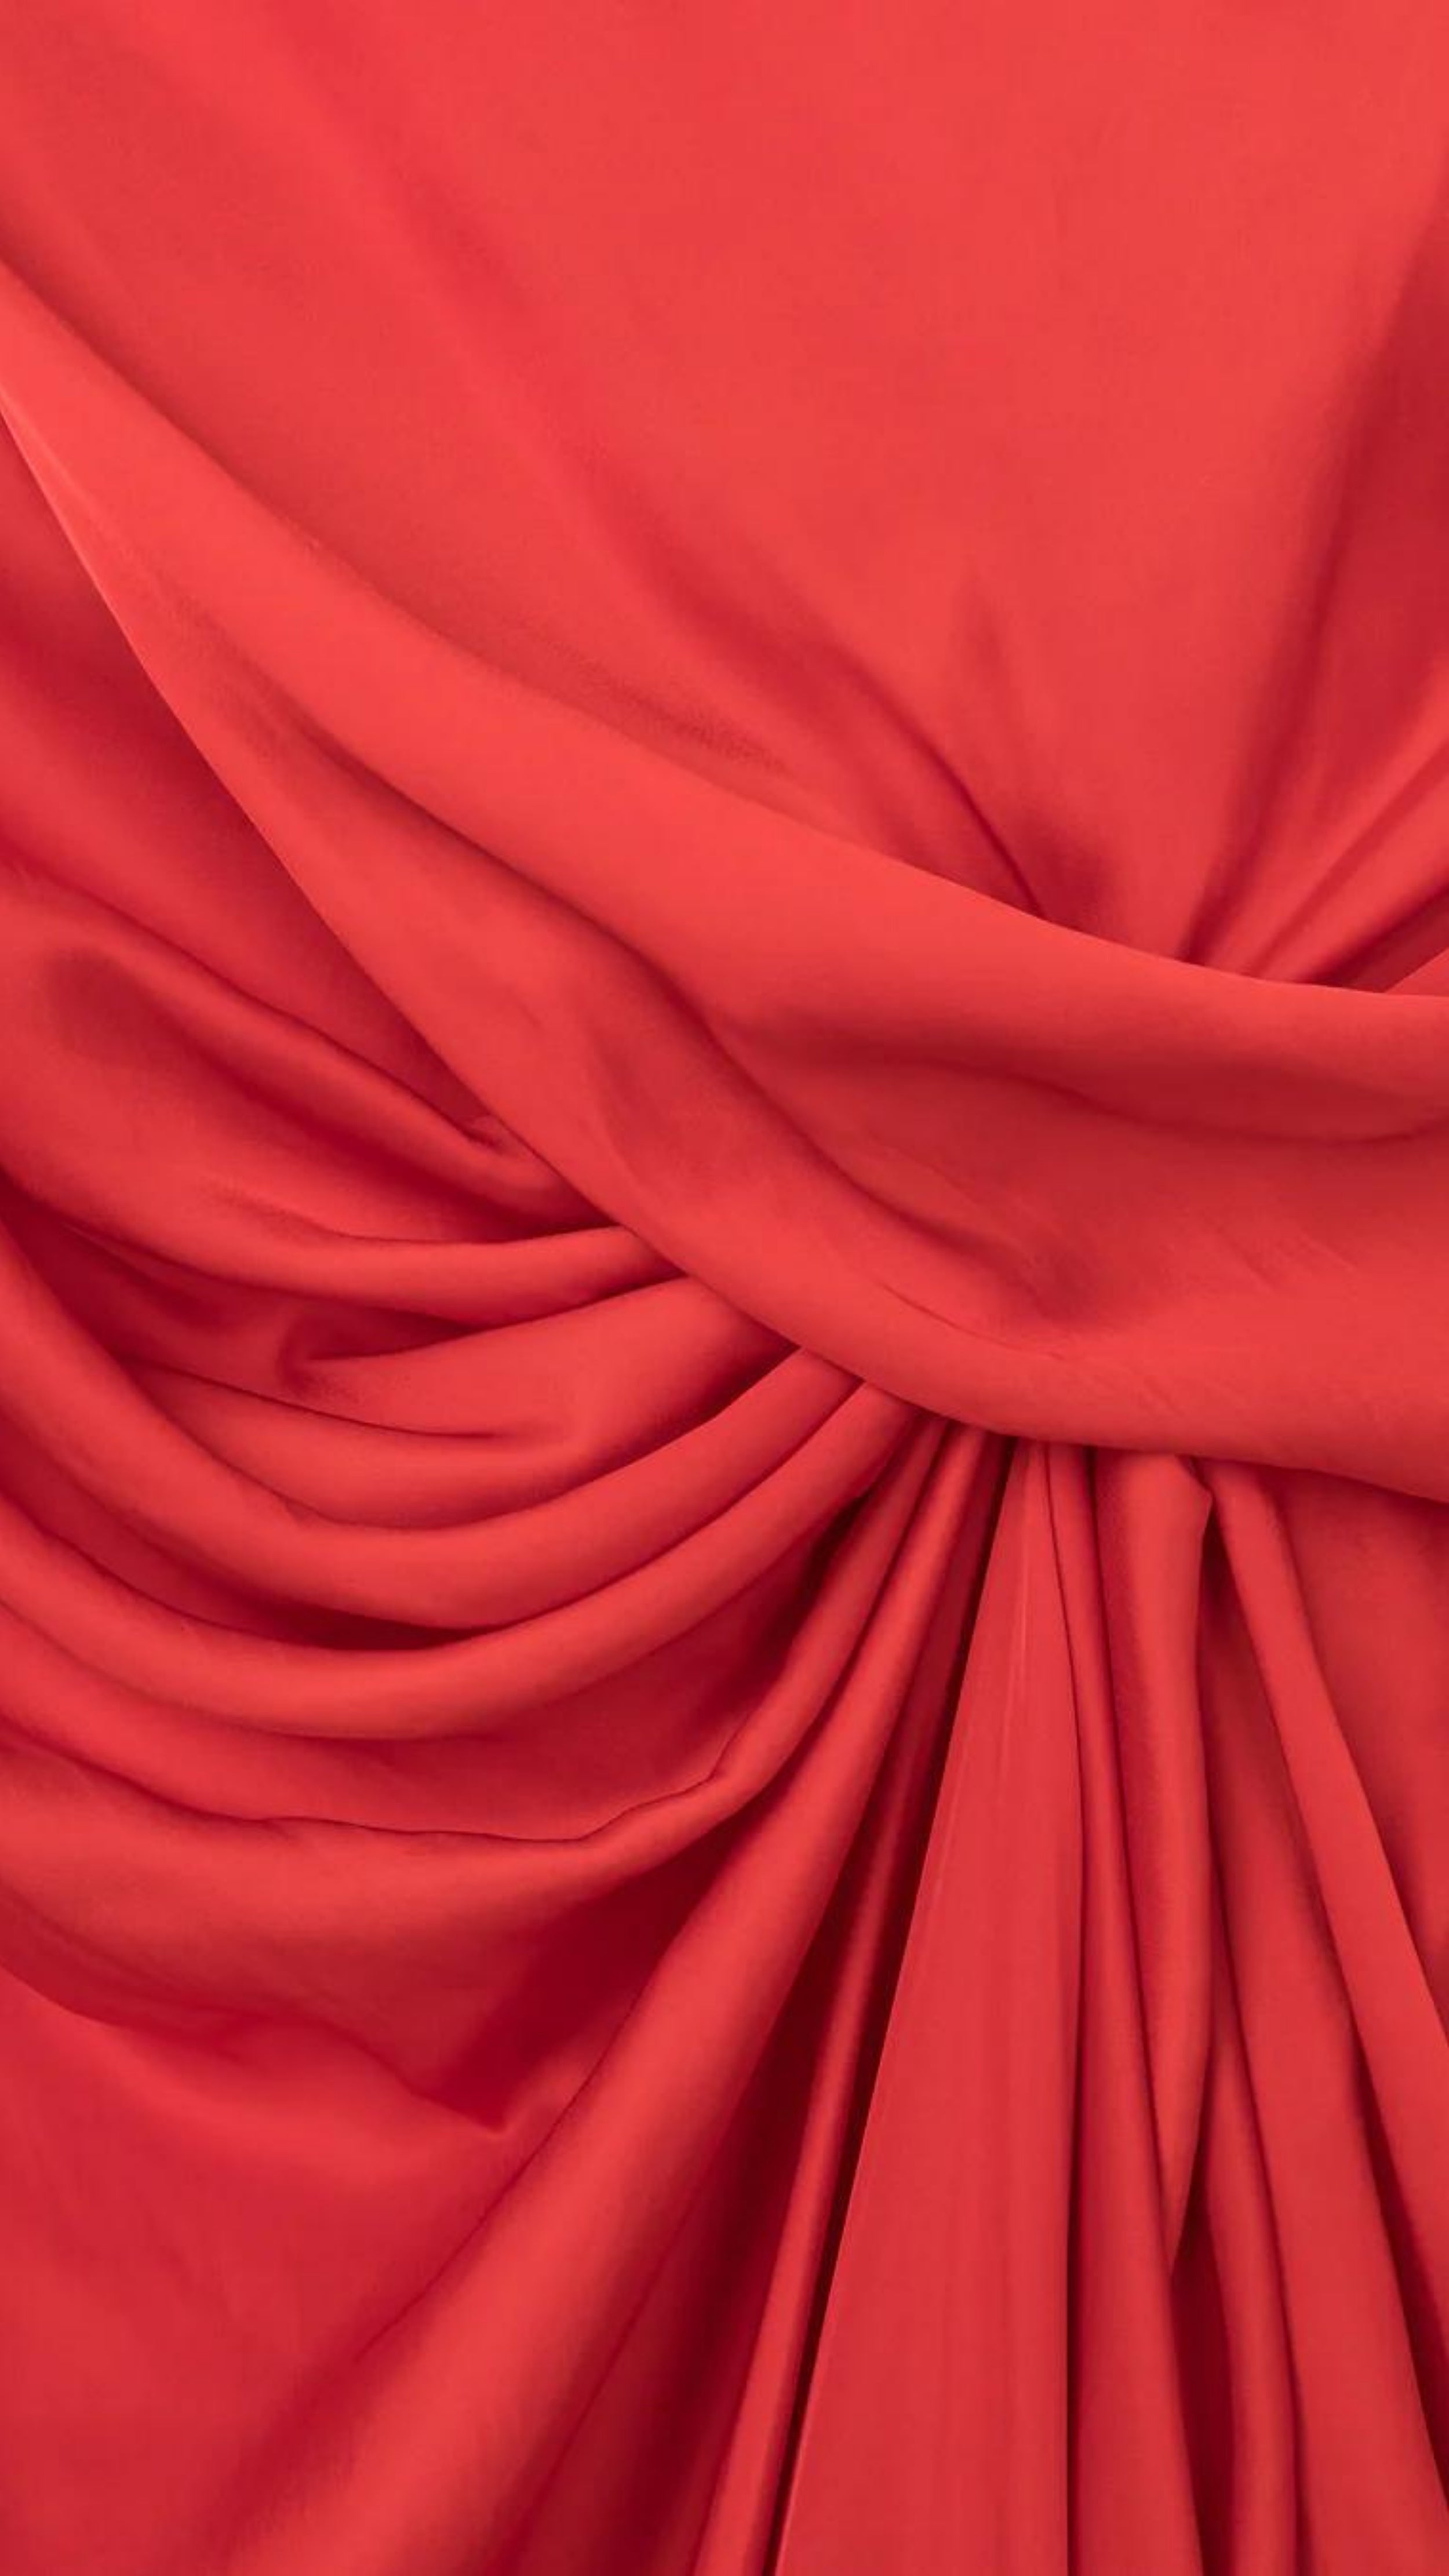 AZ Factory Colville Molly Molloy Lucinda Chambers, Sleeveless Draped Dress in Red An elegant red formal dress with a silhouette defined by a straight neckline and asymmetrical hemline. The waistline has detailed draping and the front leg as a slit. Close up of fabric and color.